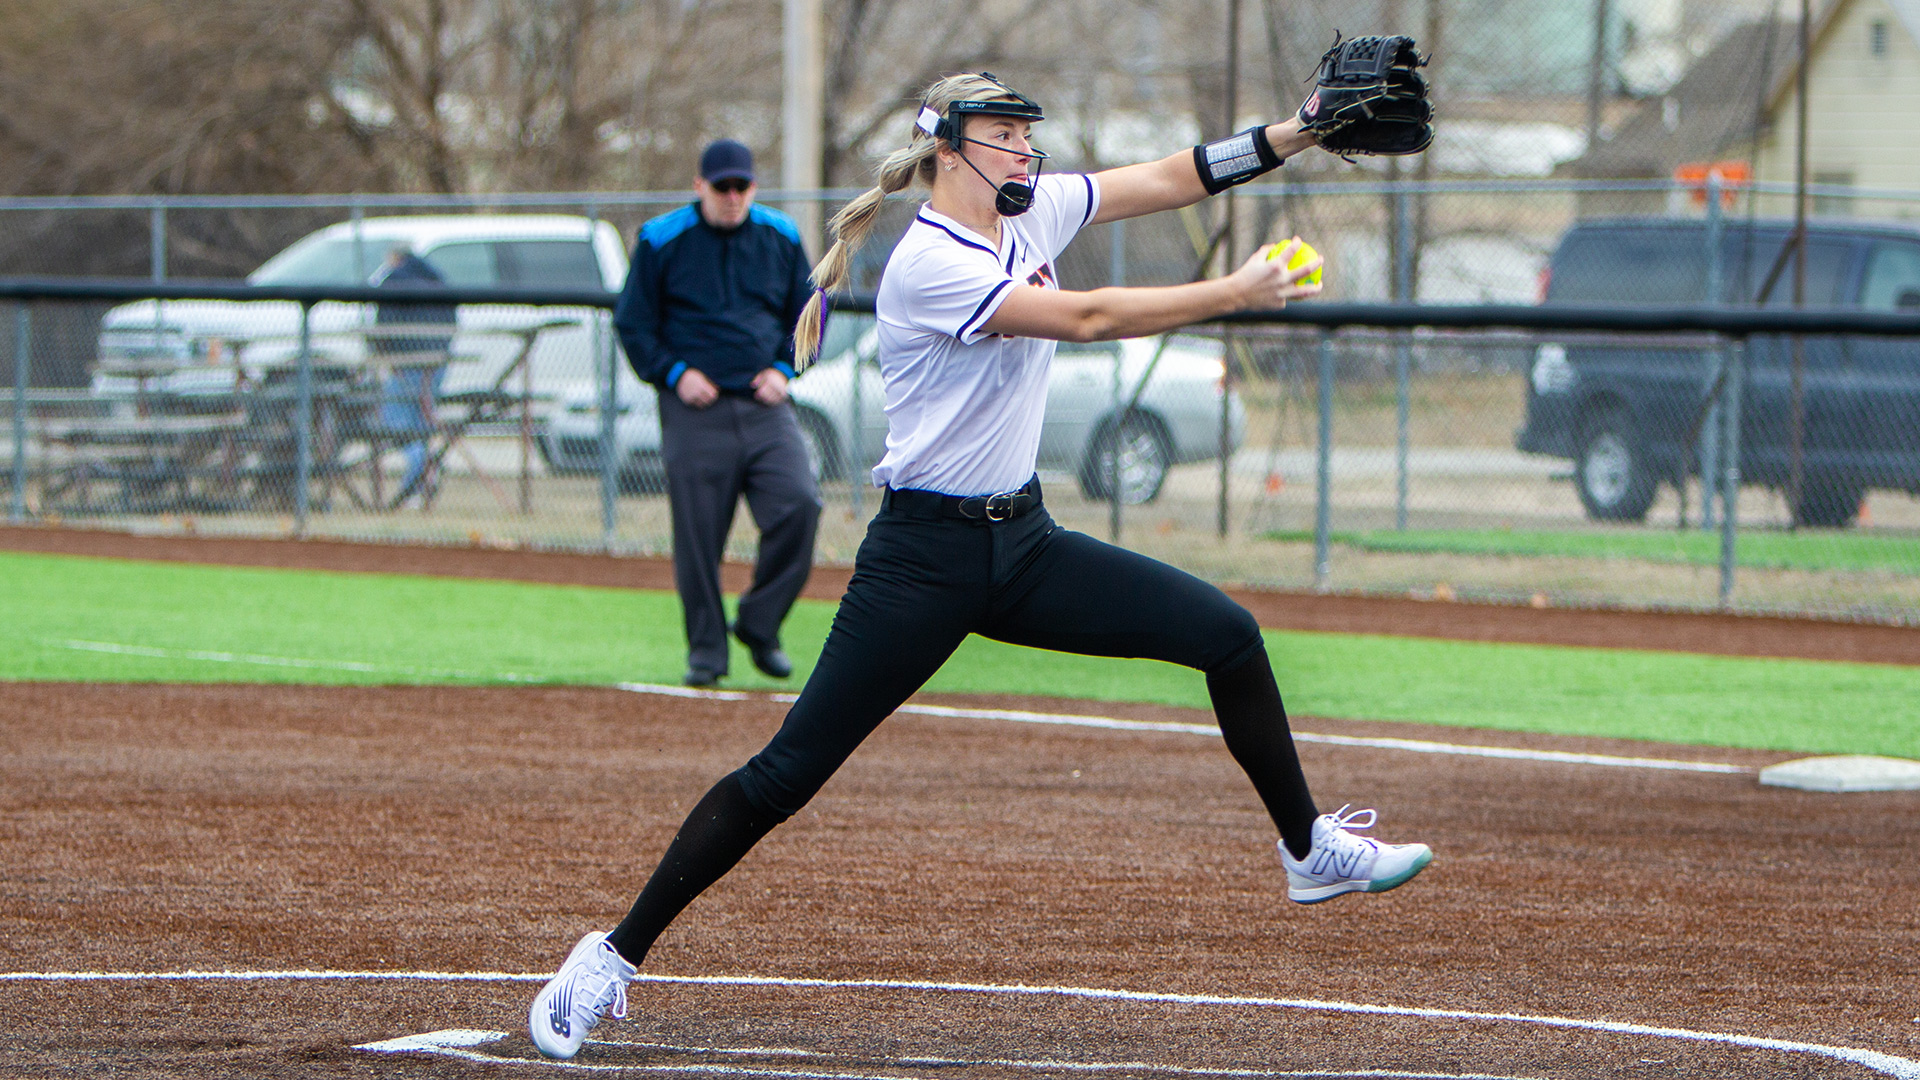 Softball win streak ends at 11 after split with Barton